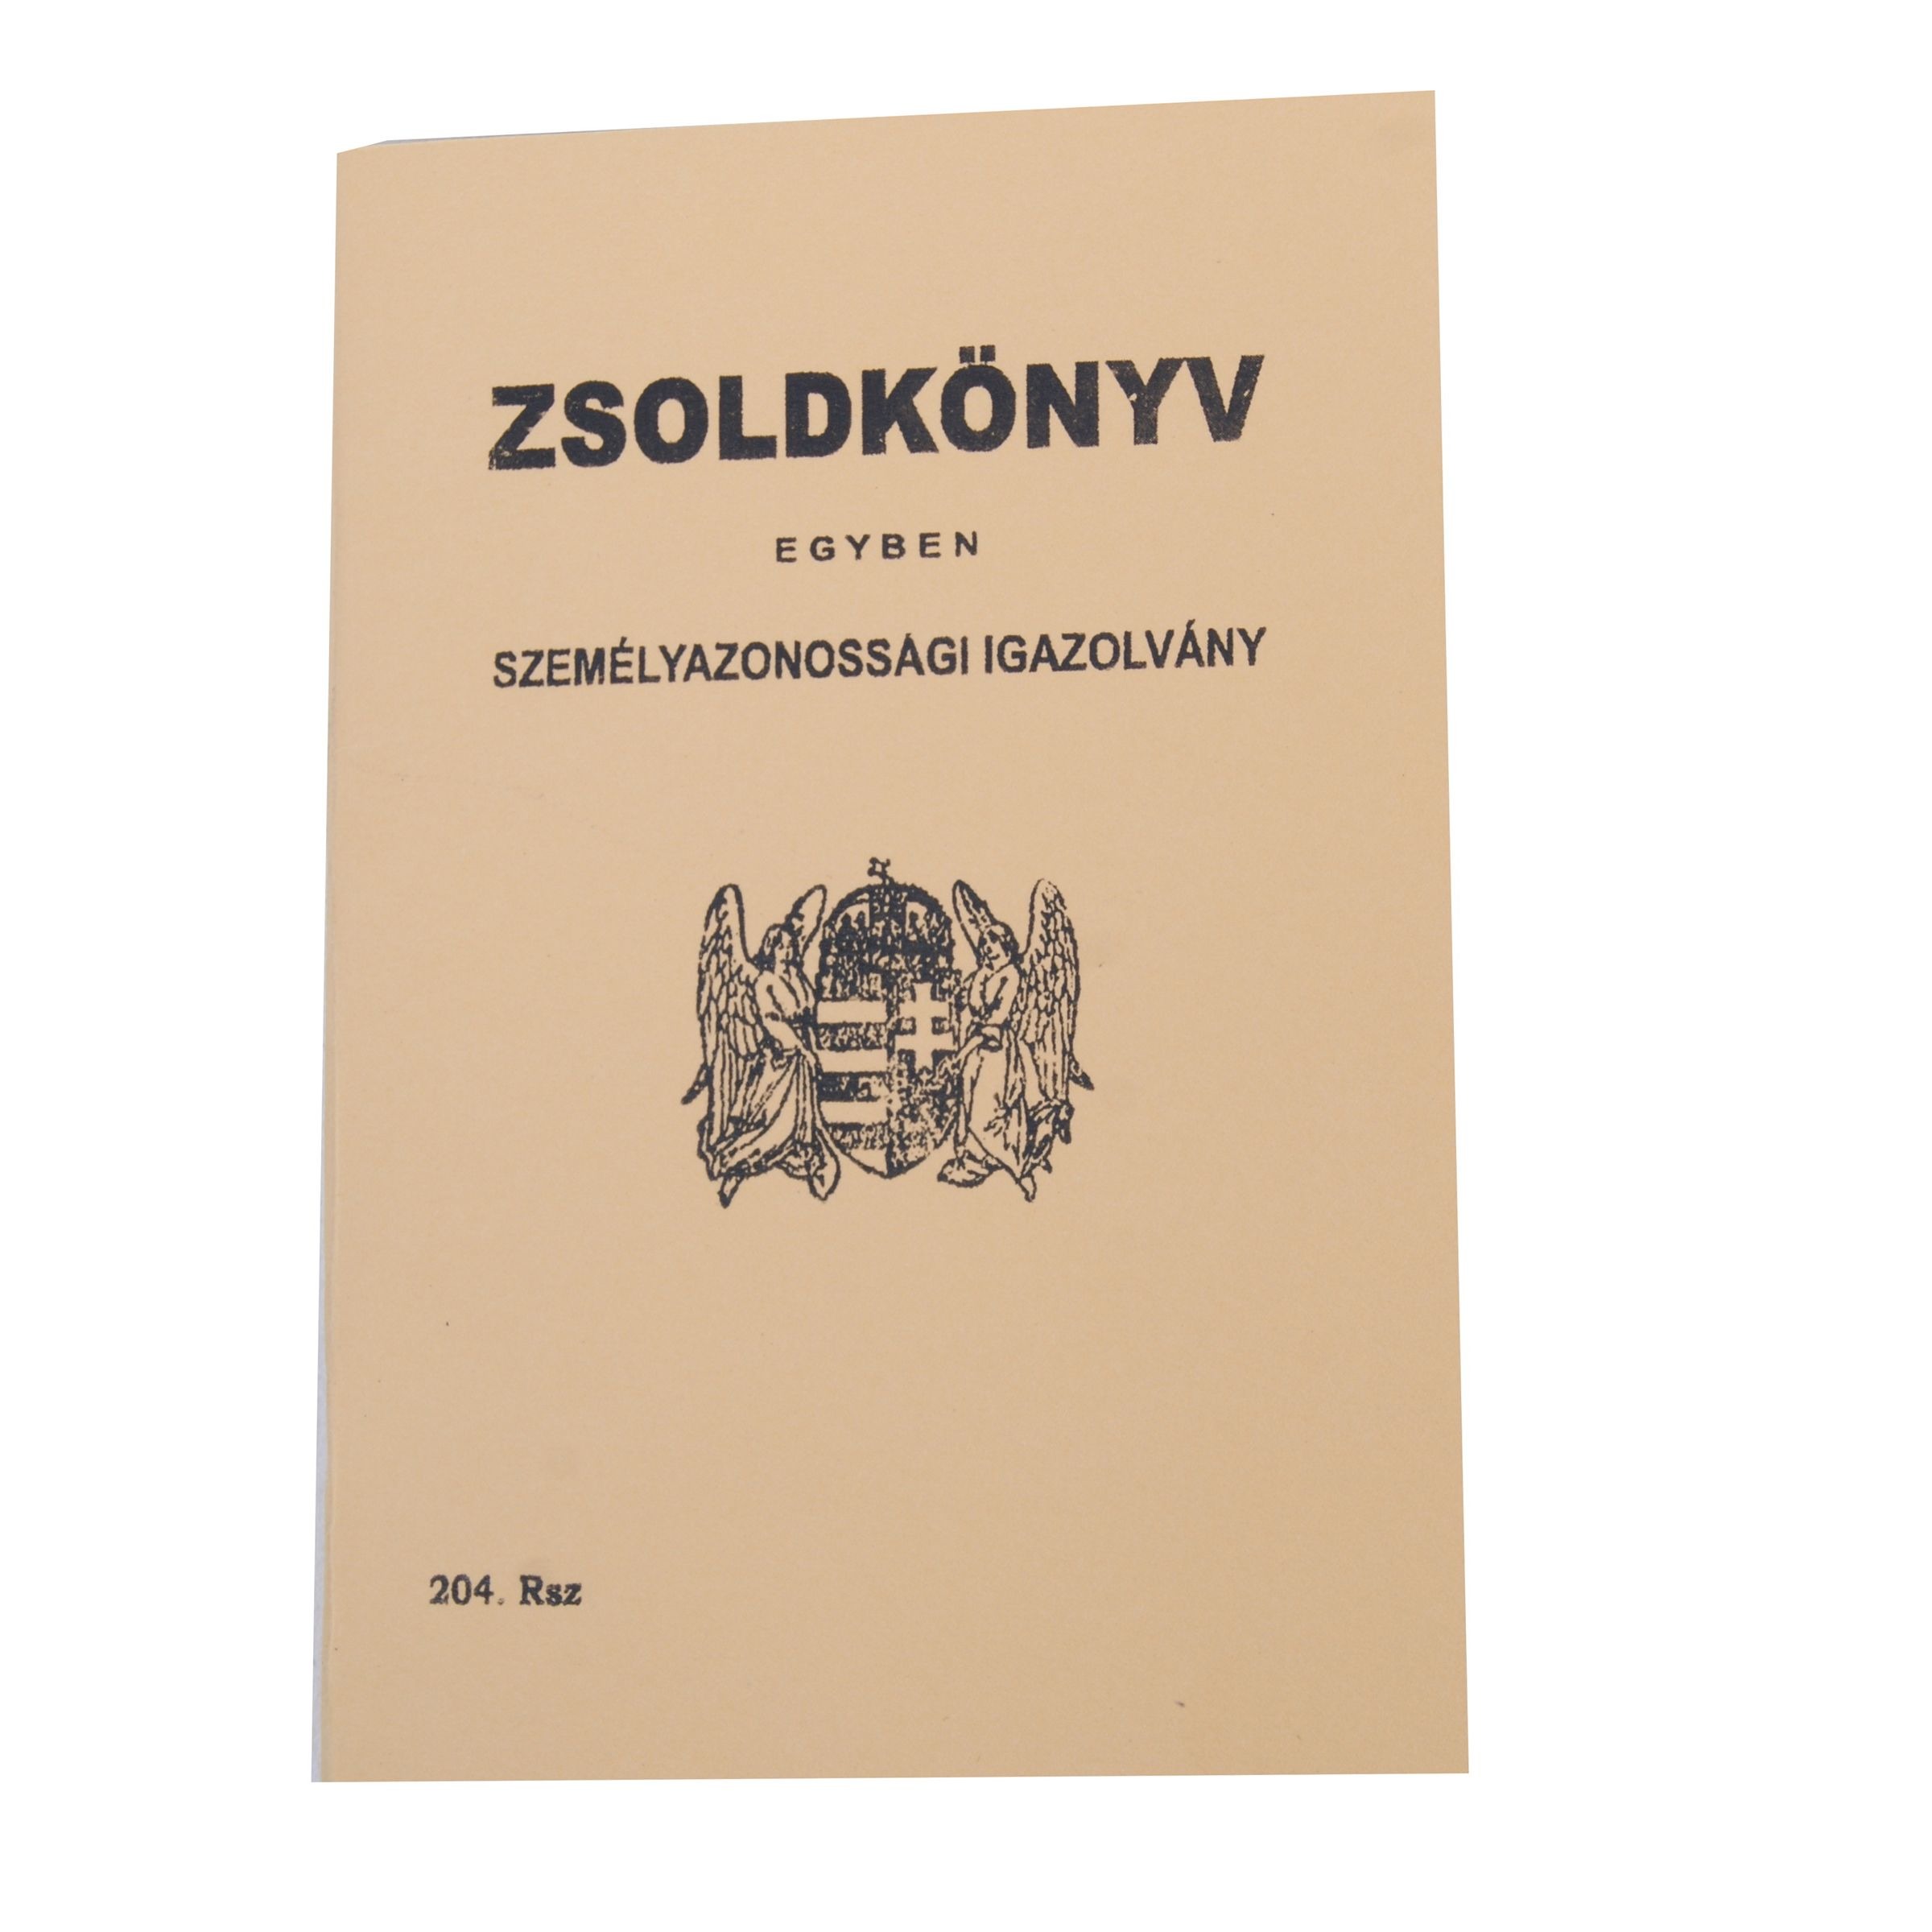 Zsoldkönyv - Hungarian soldier id book - repro